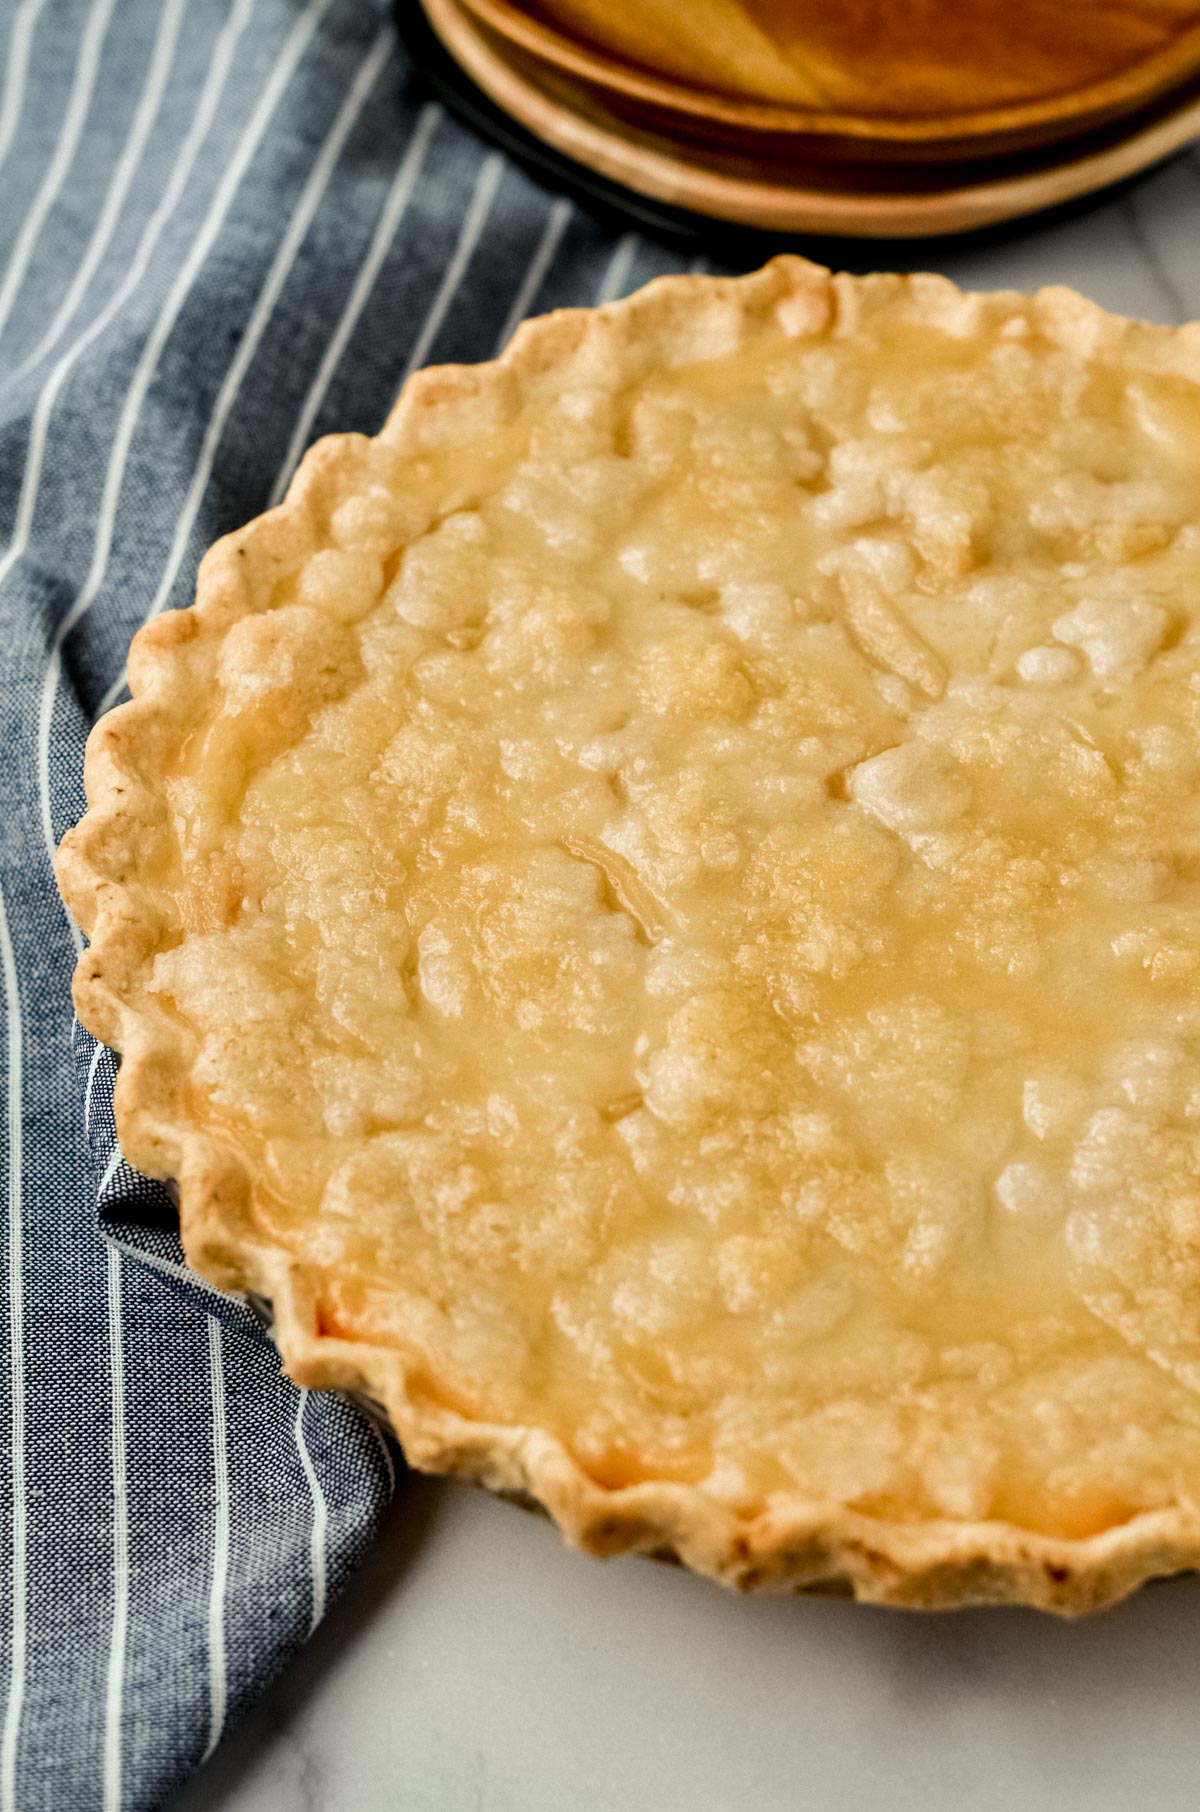 A delicious gluten-free pear pie made with a streusel topping.